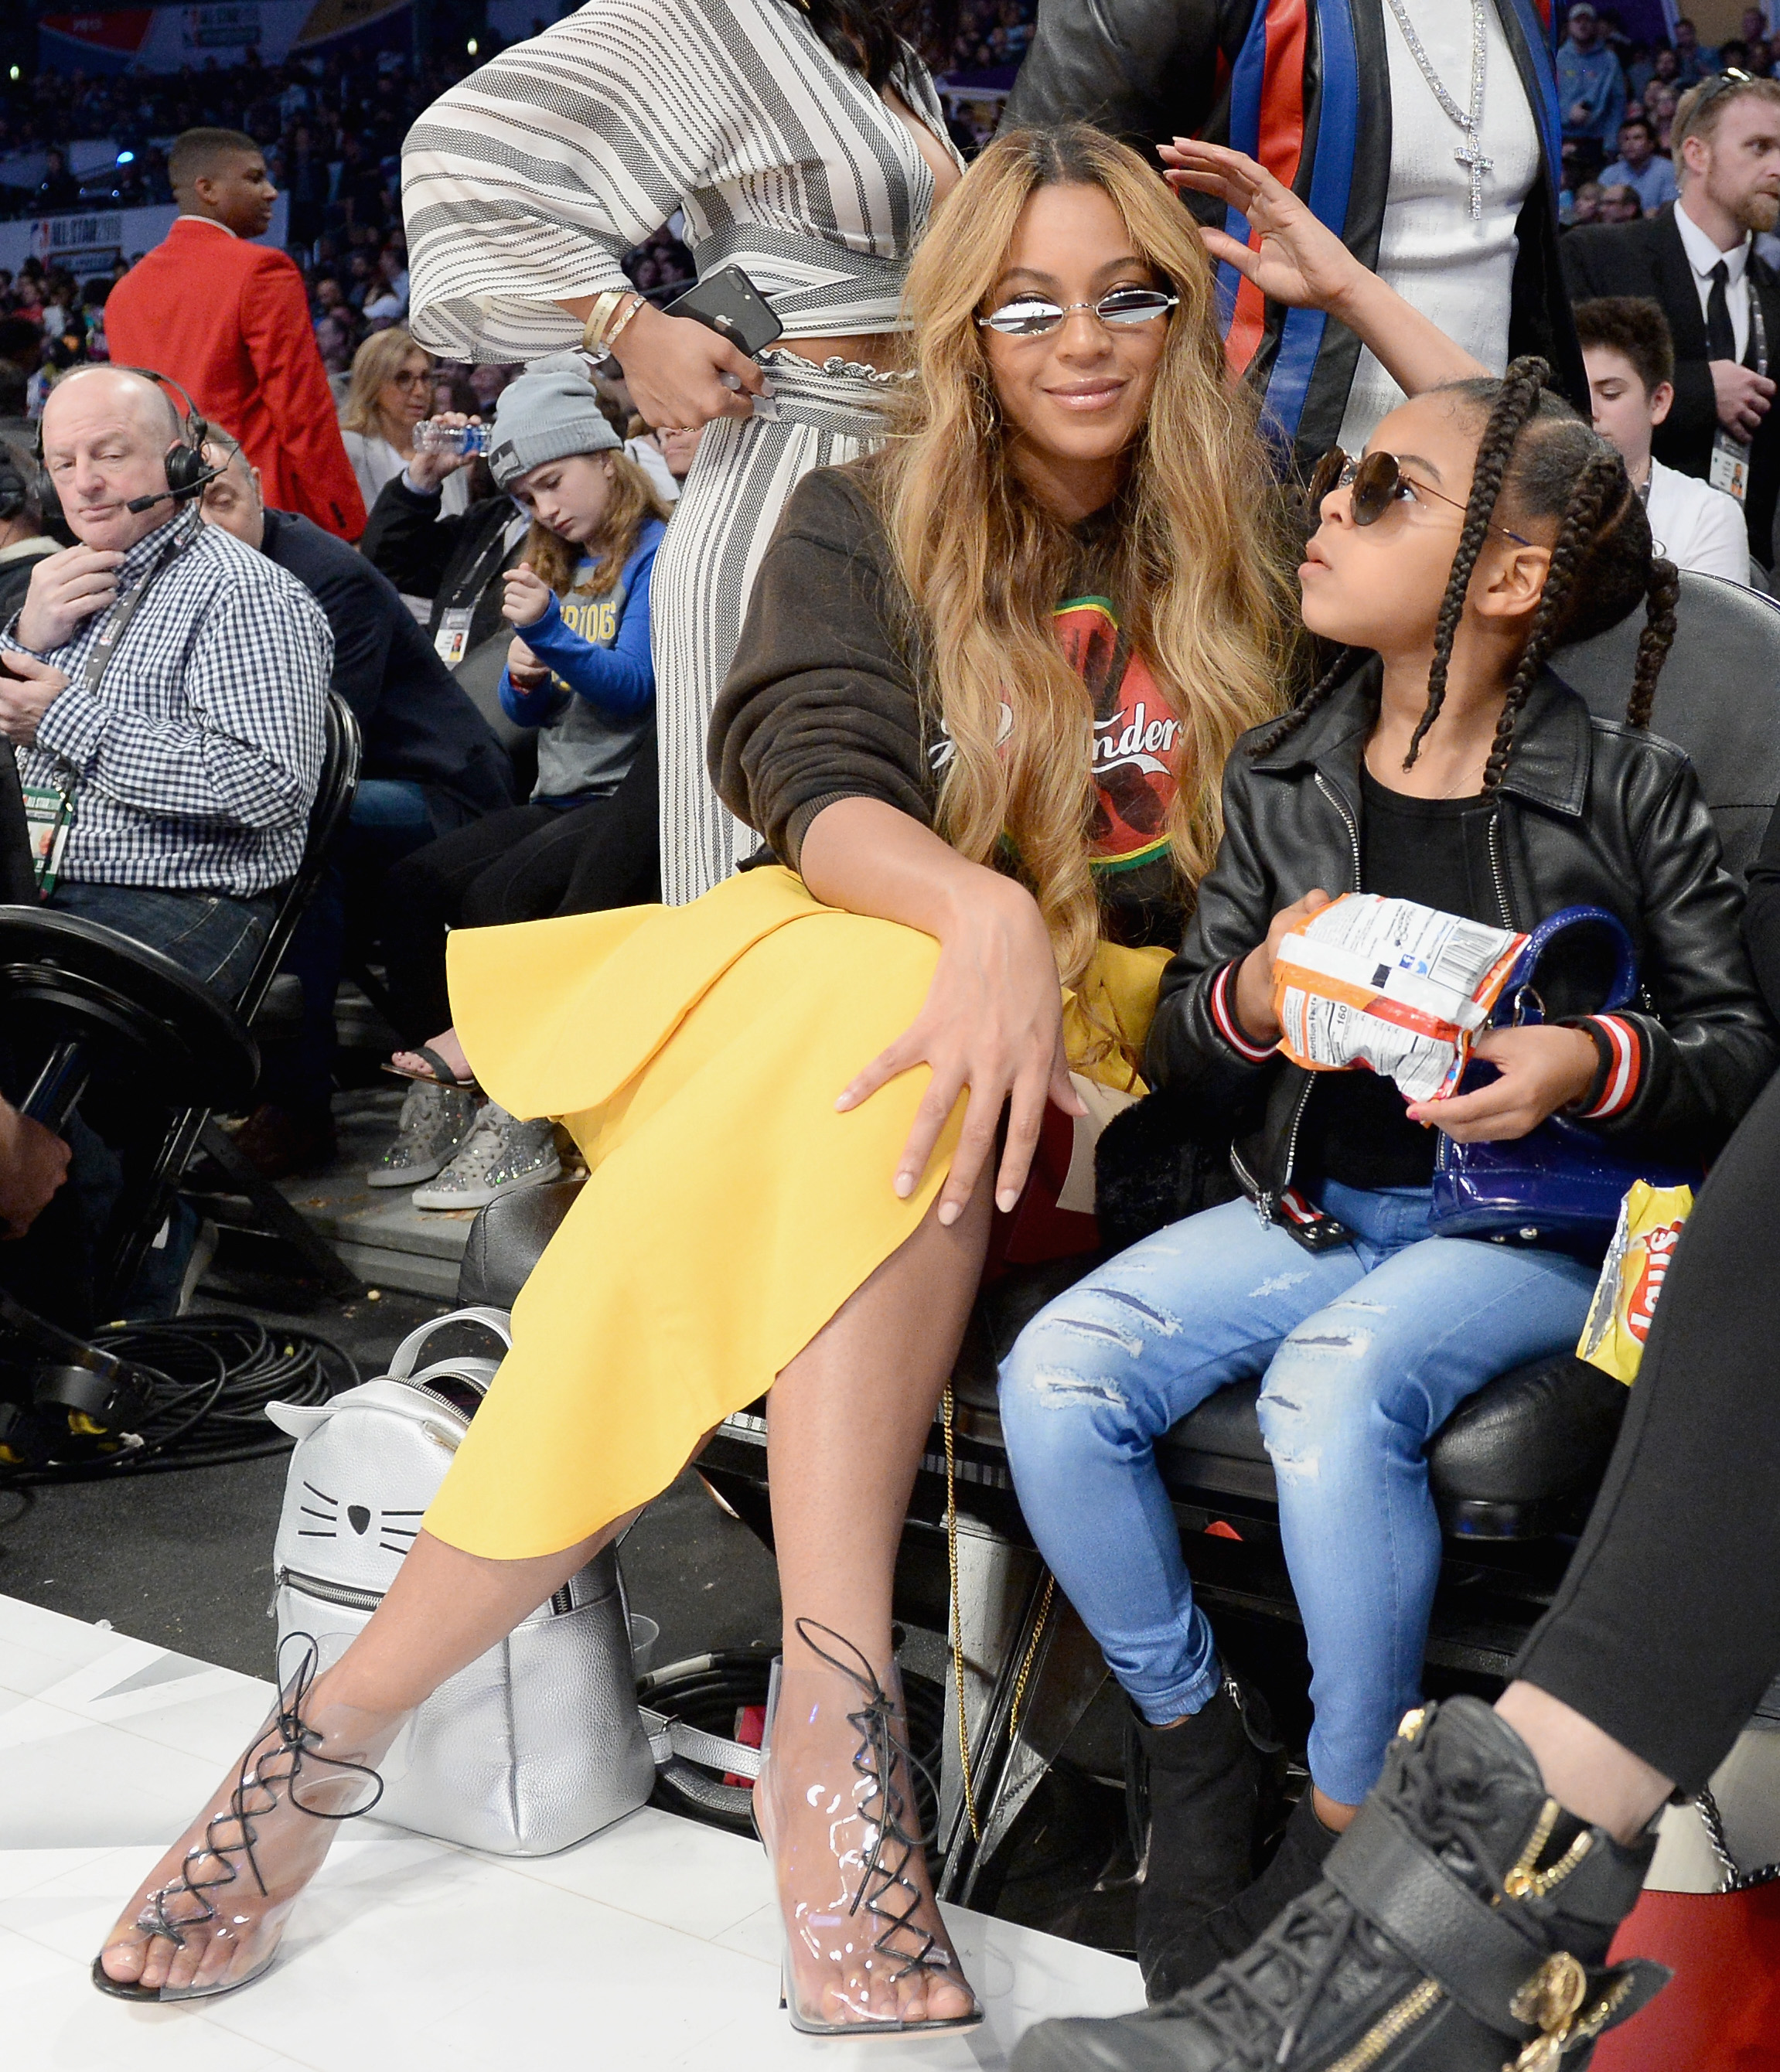 LOS ANGELES, CA - FEBRUARY 18: Beyonce and Blue Ivy Carter attend the NBA All-Star Game 2018 at Staples Center on February 18, 2018 in Los Angeles, California.